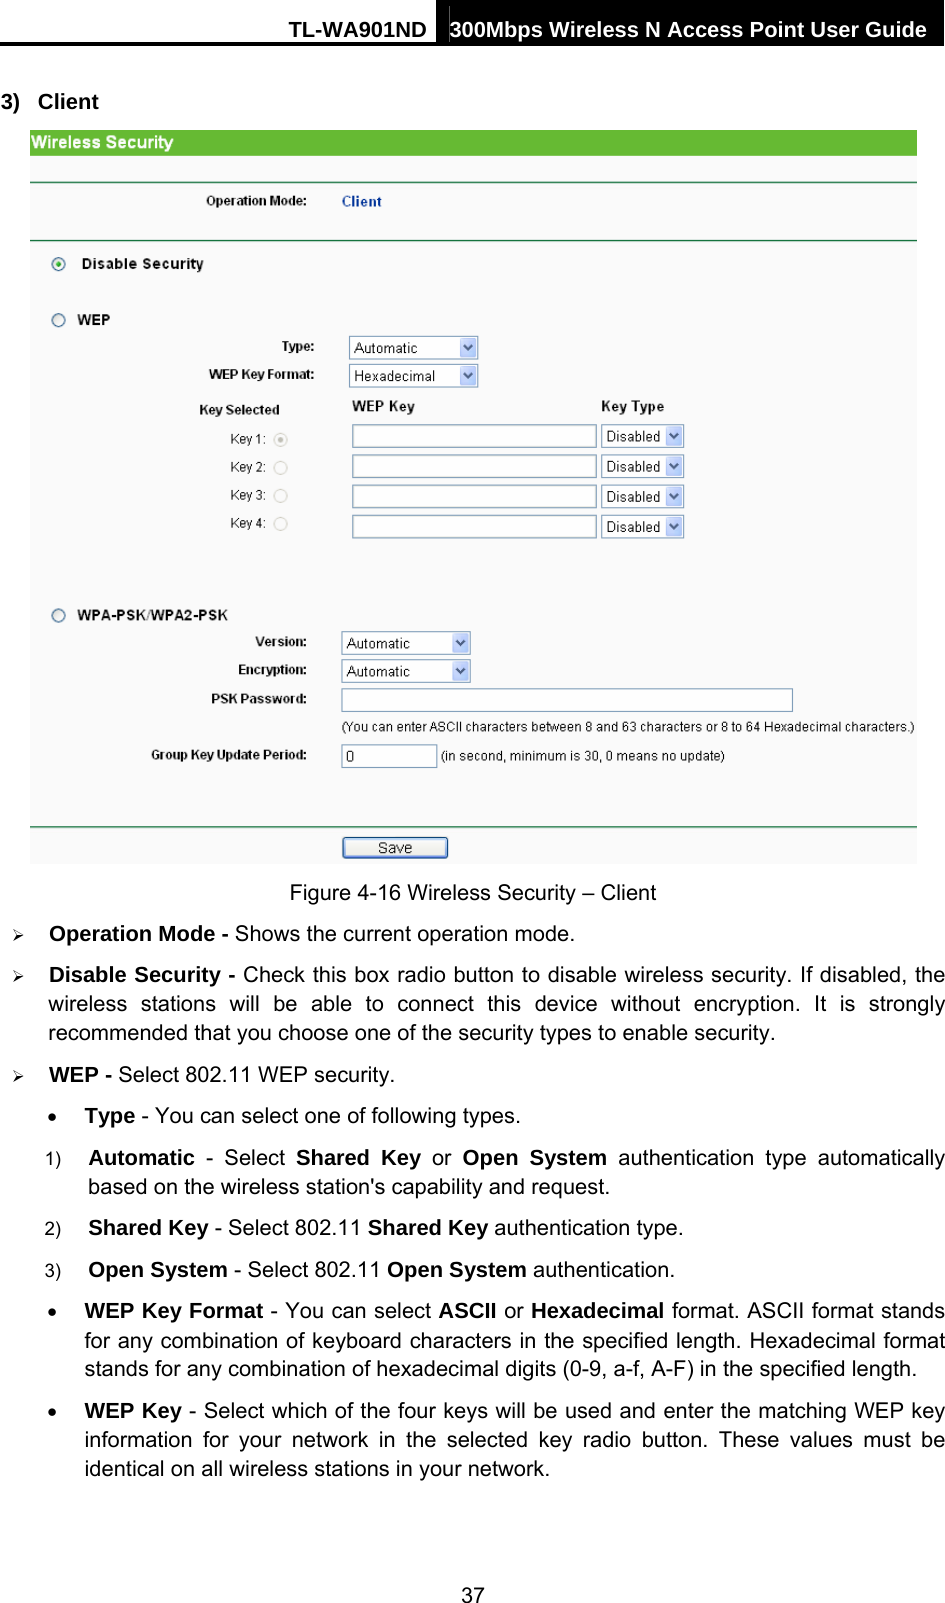 TL-WA901ND 300Mbps Wireless N Access Point User Guide 3) Client  Figure 4-16 Wireless Security – Client ¾ Operation Mode - Shows the current operation mode.   ¾ Disable Security - Check this box radio button to disable wireless security. If disabled, the wireless stations will be able to connect this device without encryption. It is strongly recommended that you choose one of the security types to enable security.   ¾ WEP - Select 802.11 WEP security.   • Type - You can select one of following types. 1)  Automatic - Select Shared Key or Open System authentication type automatically based on the wireless station&apos;s capability and request.   2)  Shared Key - Select 802.11 Shared Key authentication type.   3)  Open System - Select 802.11 Open System authentication.   • WEP Key Format - You can select ASCII or Hexadecimal format. ASCII format stands for any combination of keyboard characters in the specified length. Hexadecimal format stands for any combination of hexadecimal digits (0-9, a-f, A-F) in the specified length. • WEP Key - Select which of the four keys will be used and enter the matching WEP key information for your network in the selected key radio button. These values must be identical on all wireless stations in your network.   37 